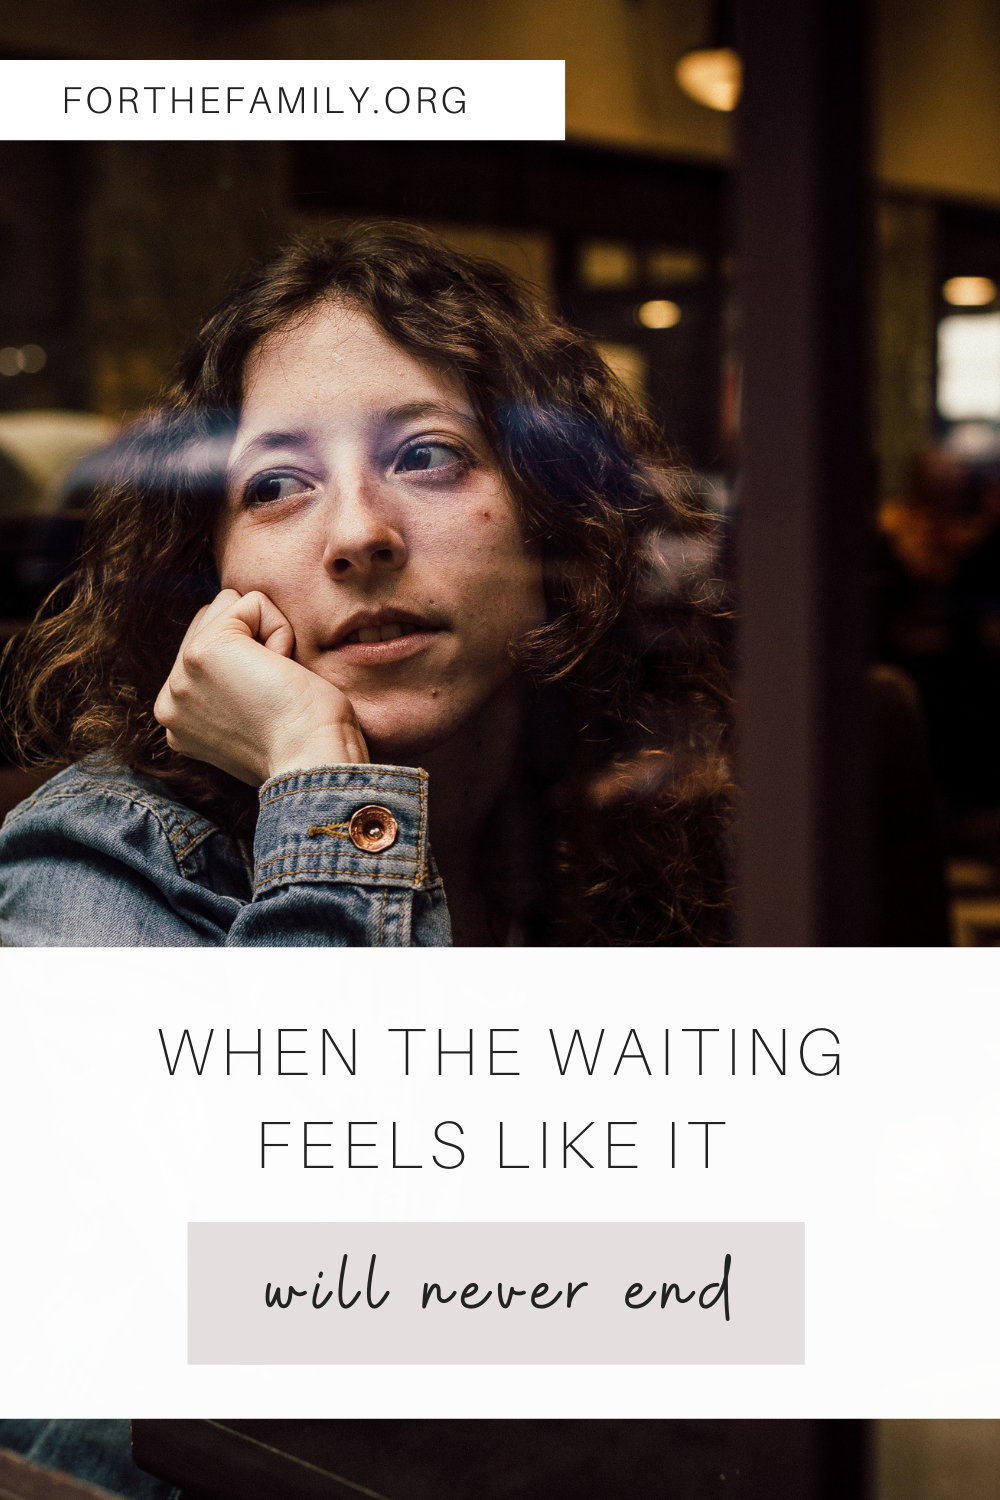 When the waiting feels like it will never end